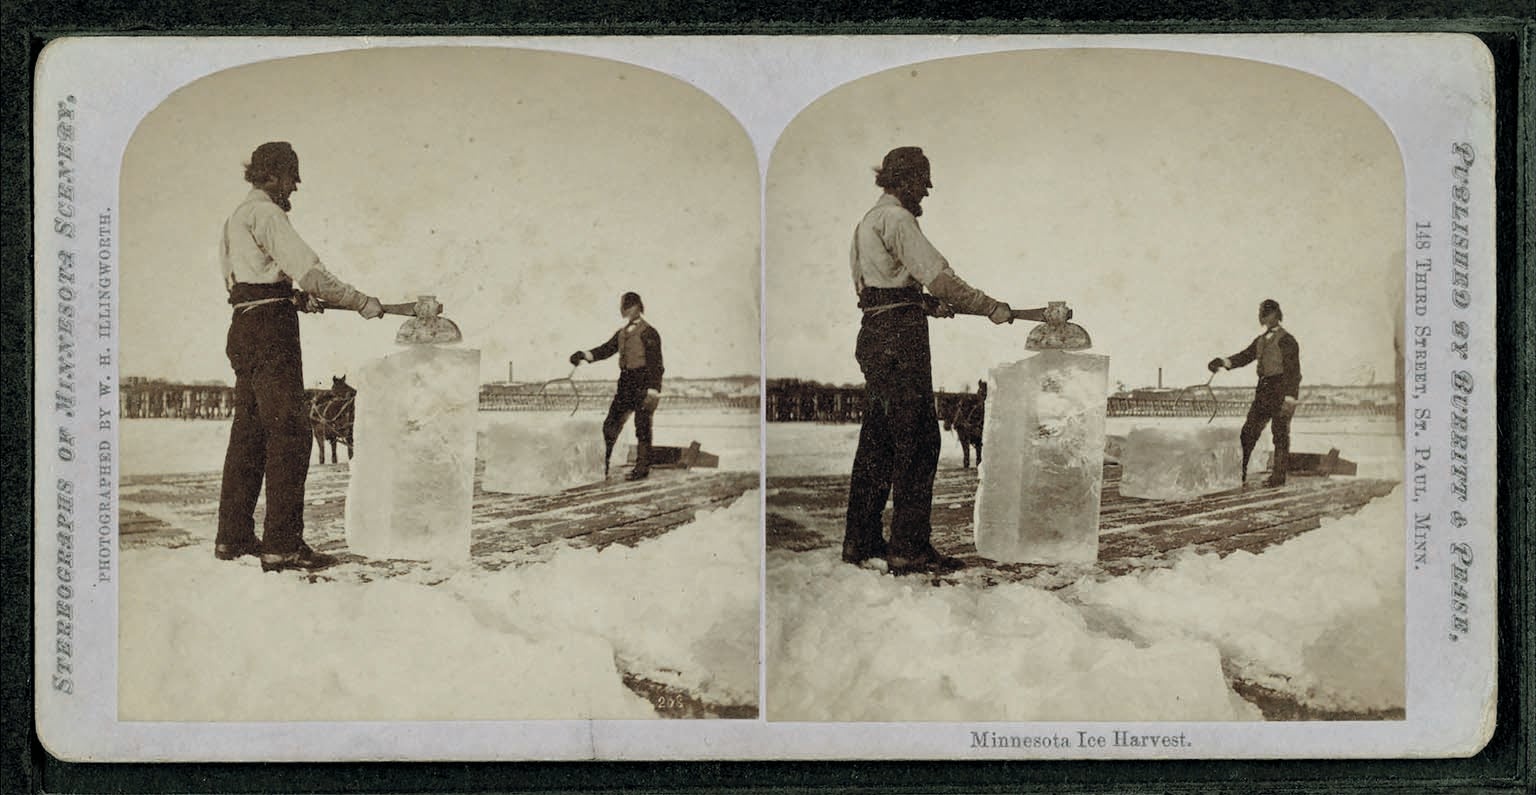 Old photograph of men harvesting ice.